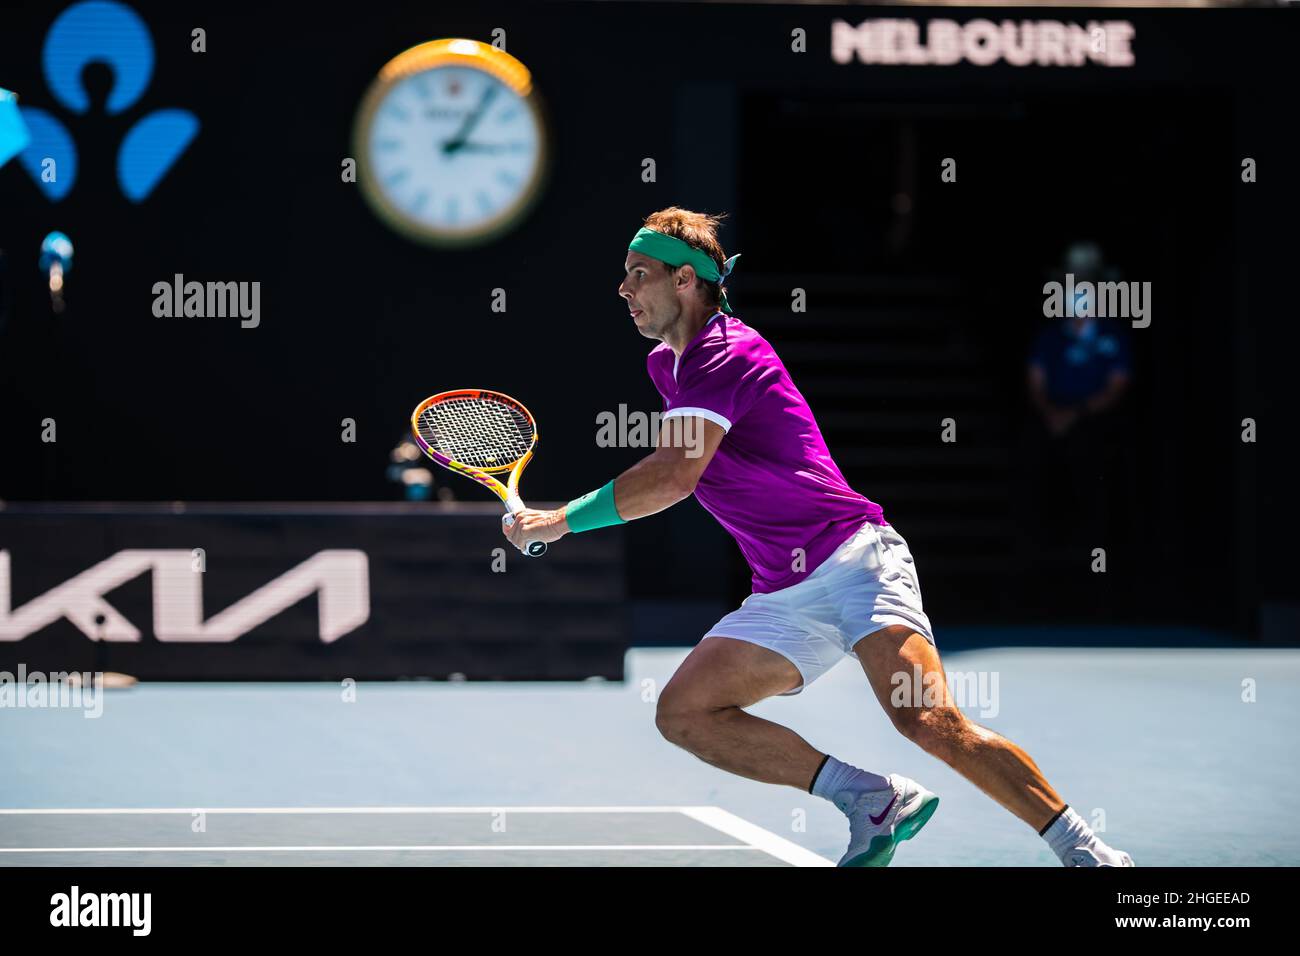 Rafael Nadal in action during the Australian Open 2022 Round 1 match of the Grand Slam at Rod Laver Arena in Melbourne Olympic Park.(Final score Nadal wins in 3 sets 61, 64, 62 Stock Photo